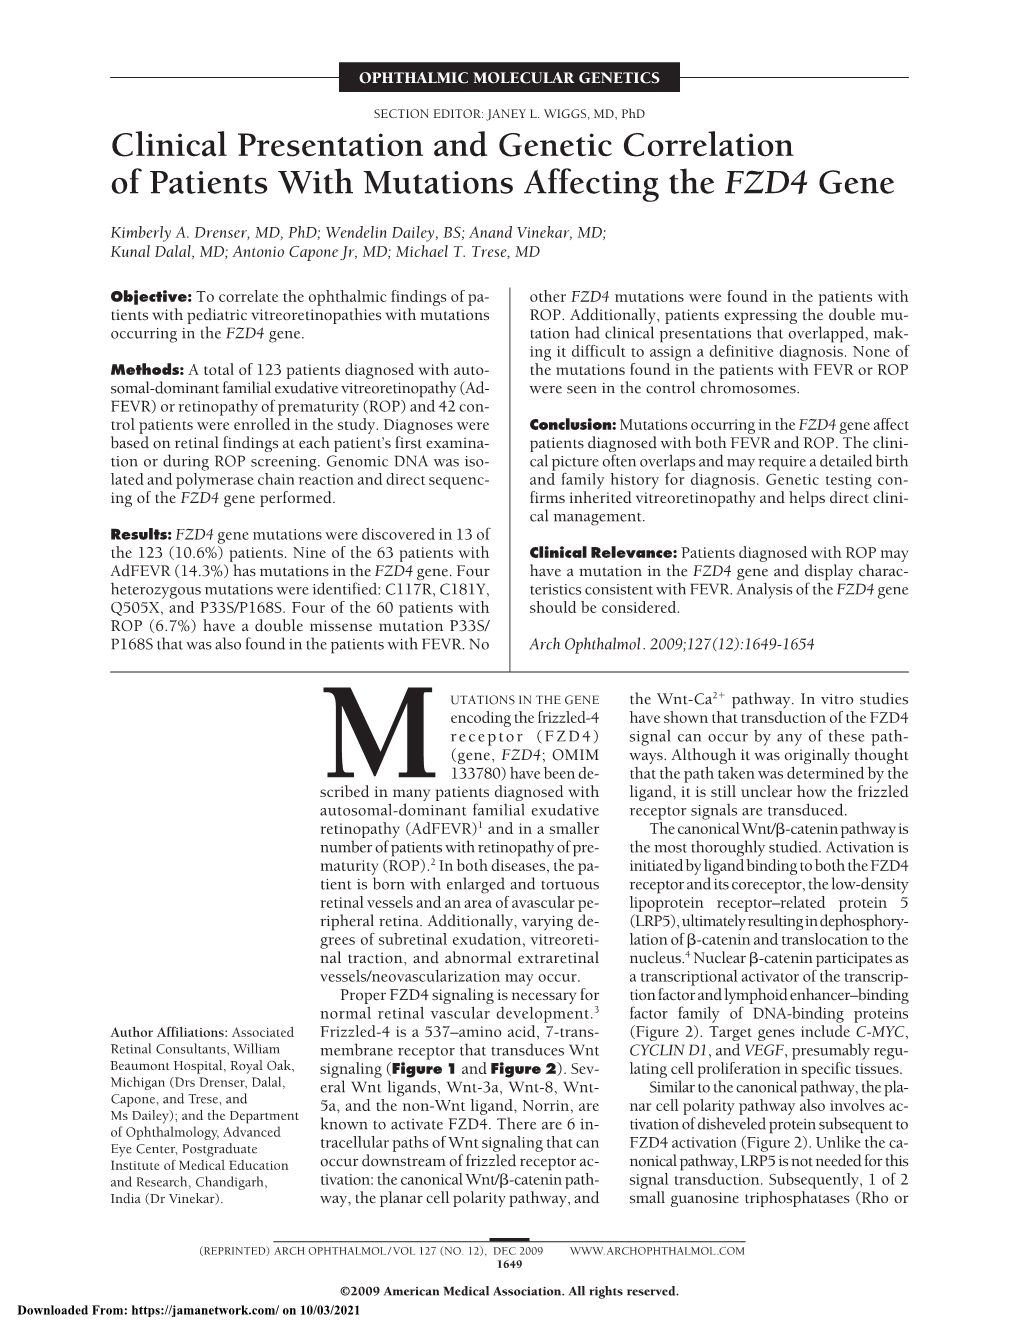 Clinical Presentation and Genetic Correlation of Patients with Mutations Affecting the FZD4 Gene